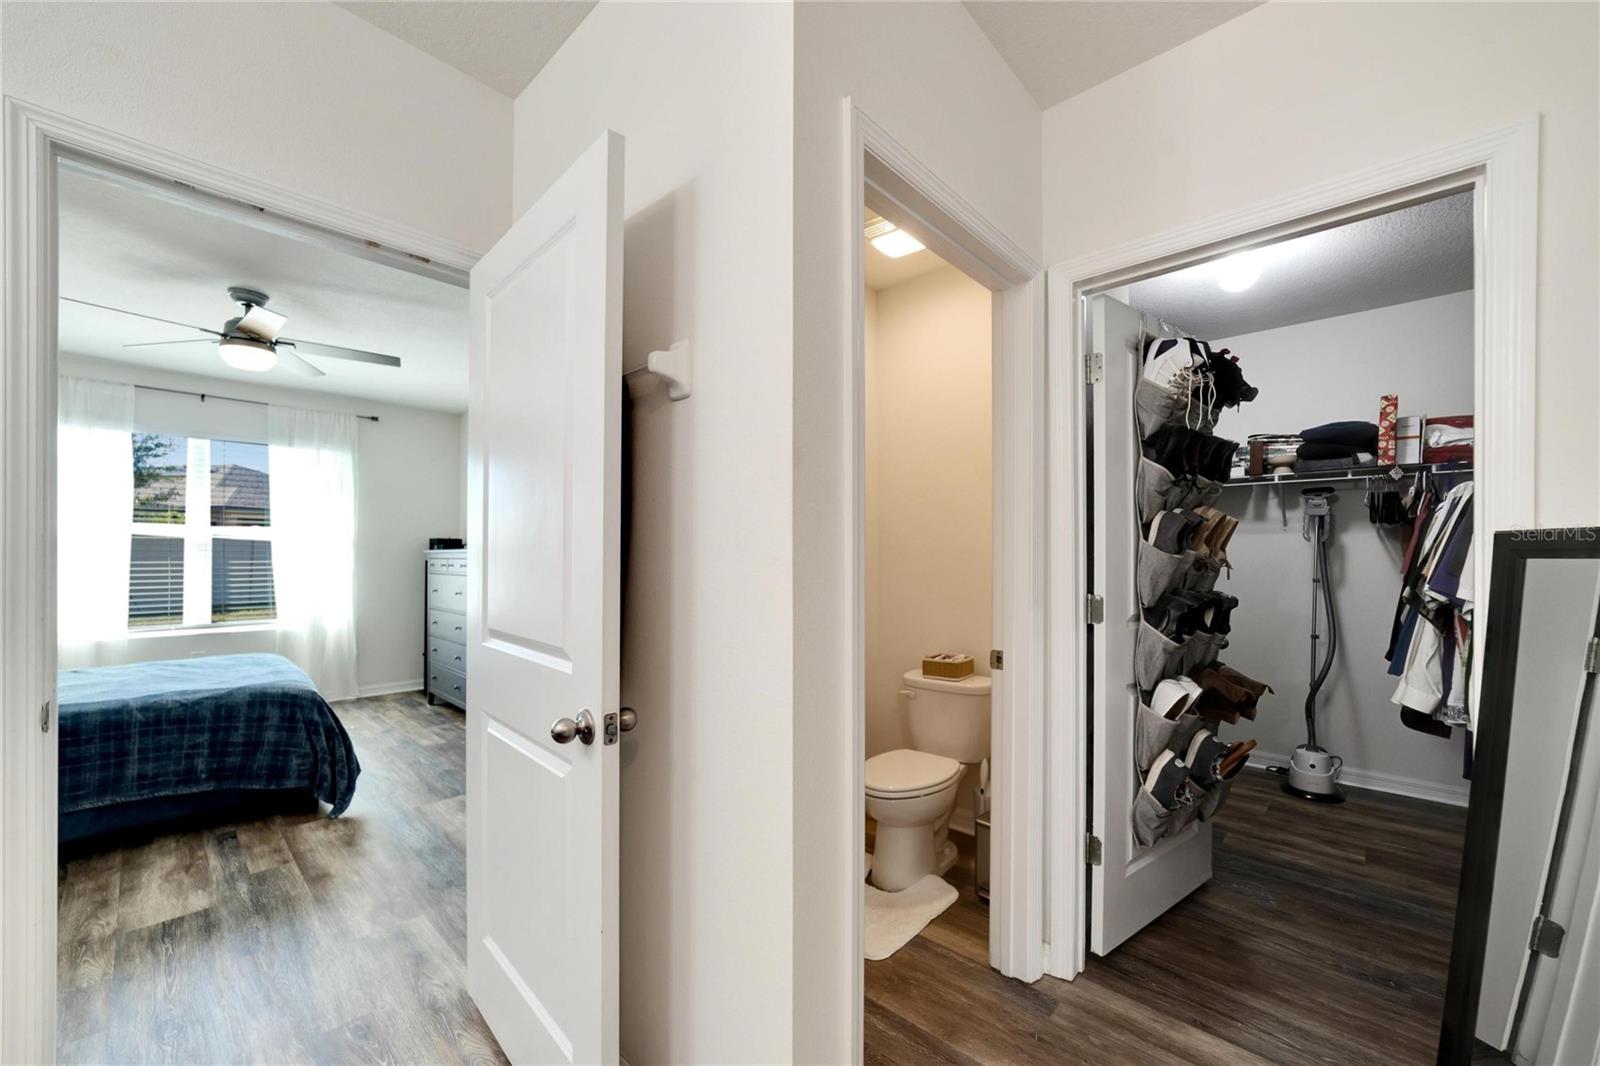 Master Bedroom - Private Water Closet - Large Walk-In Closet